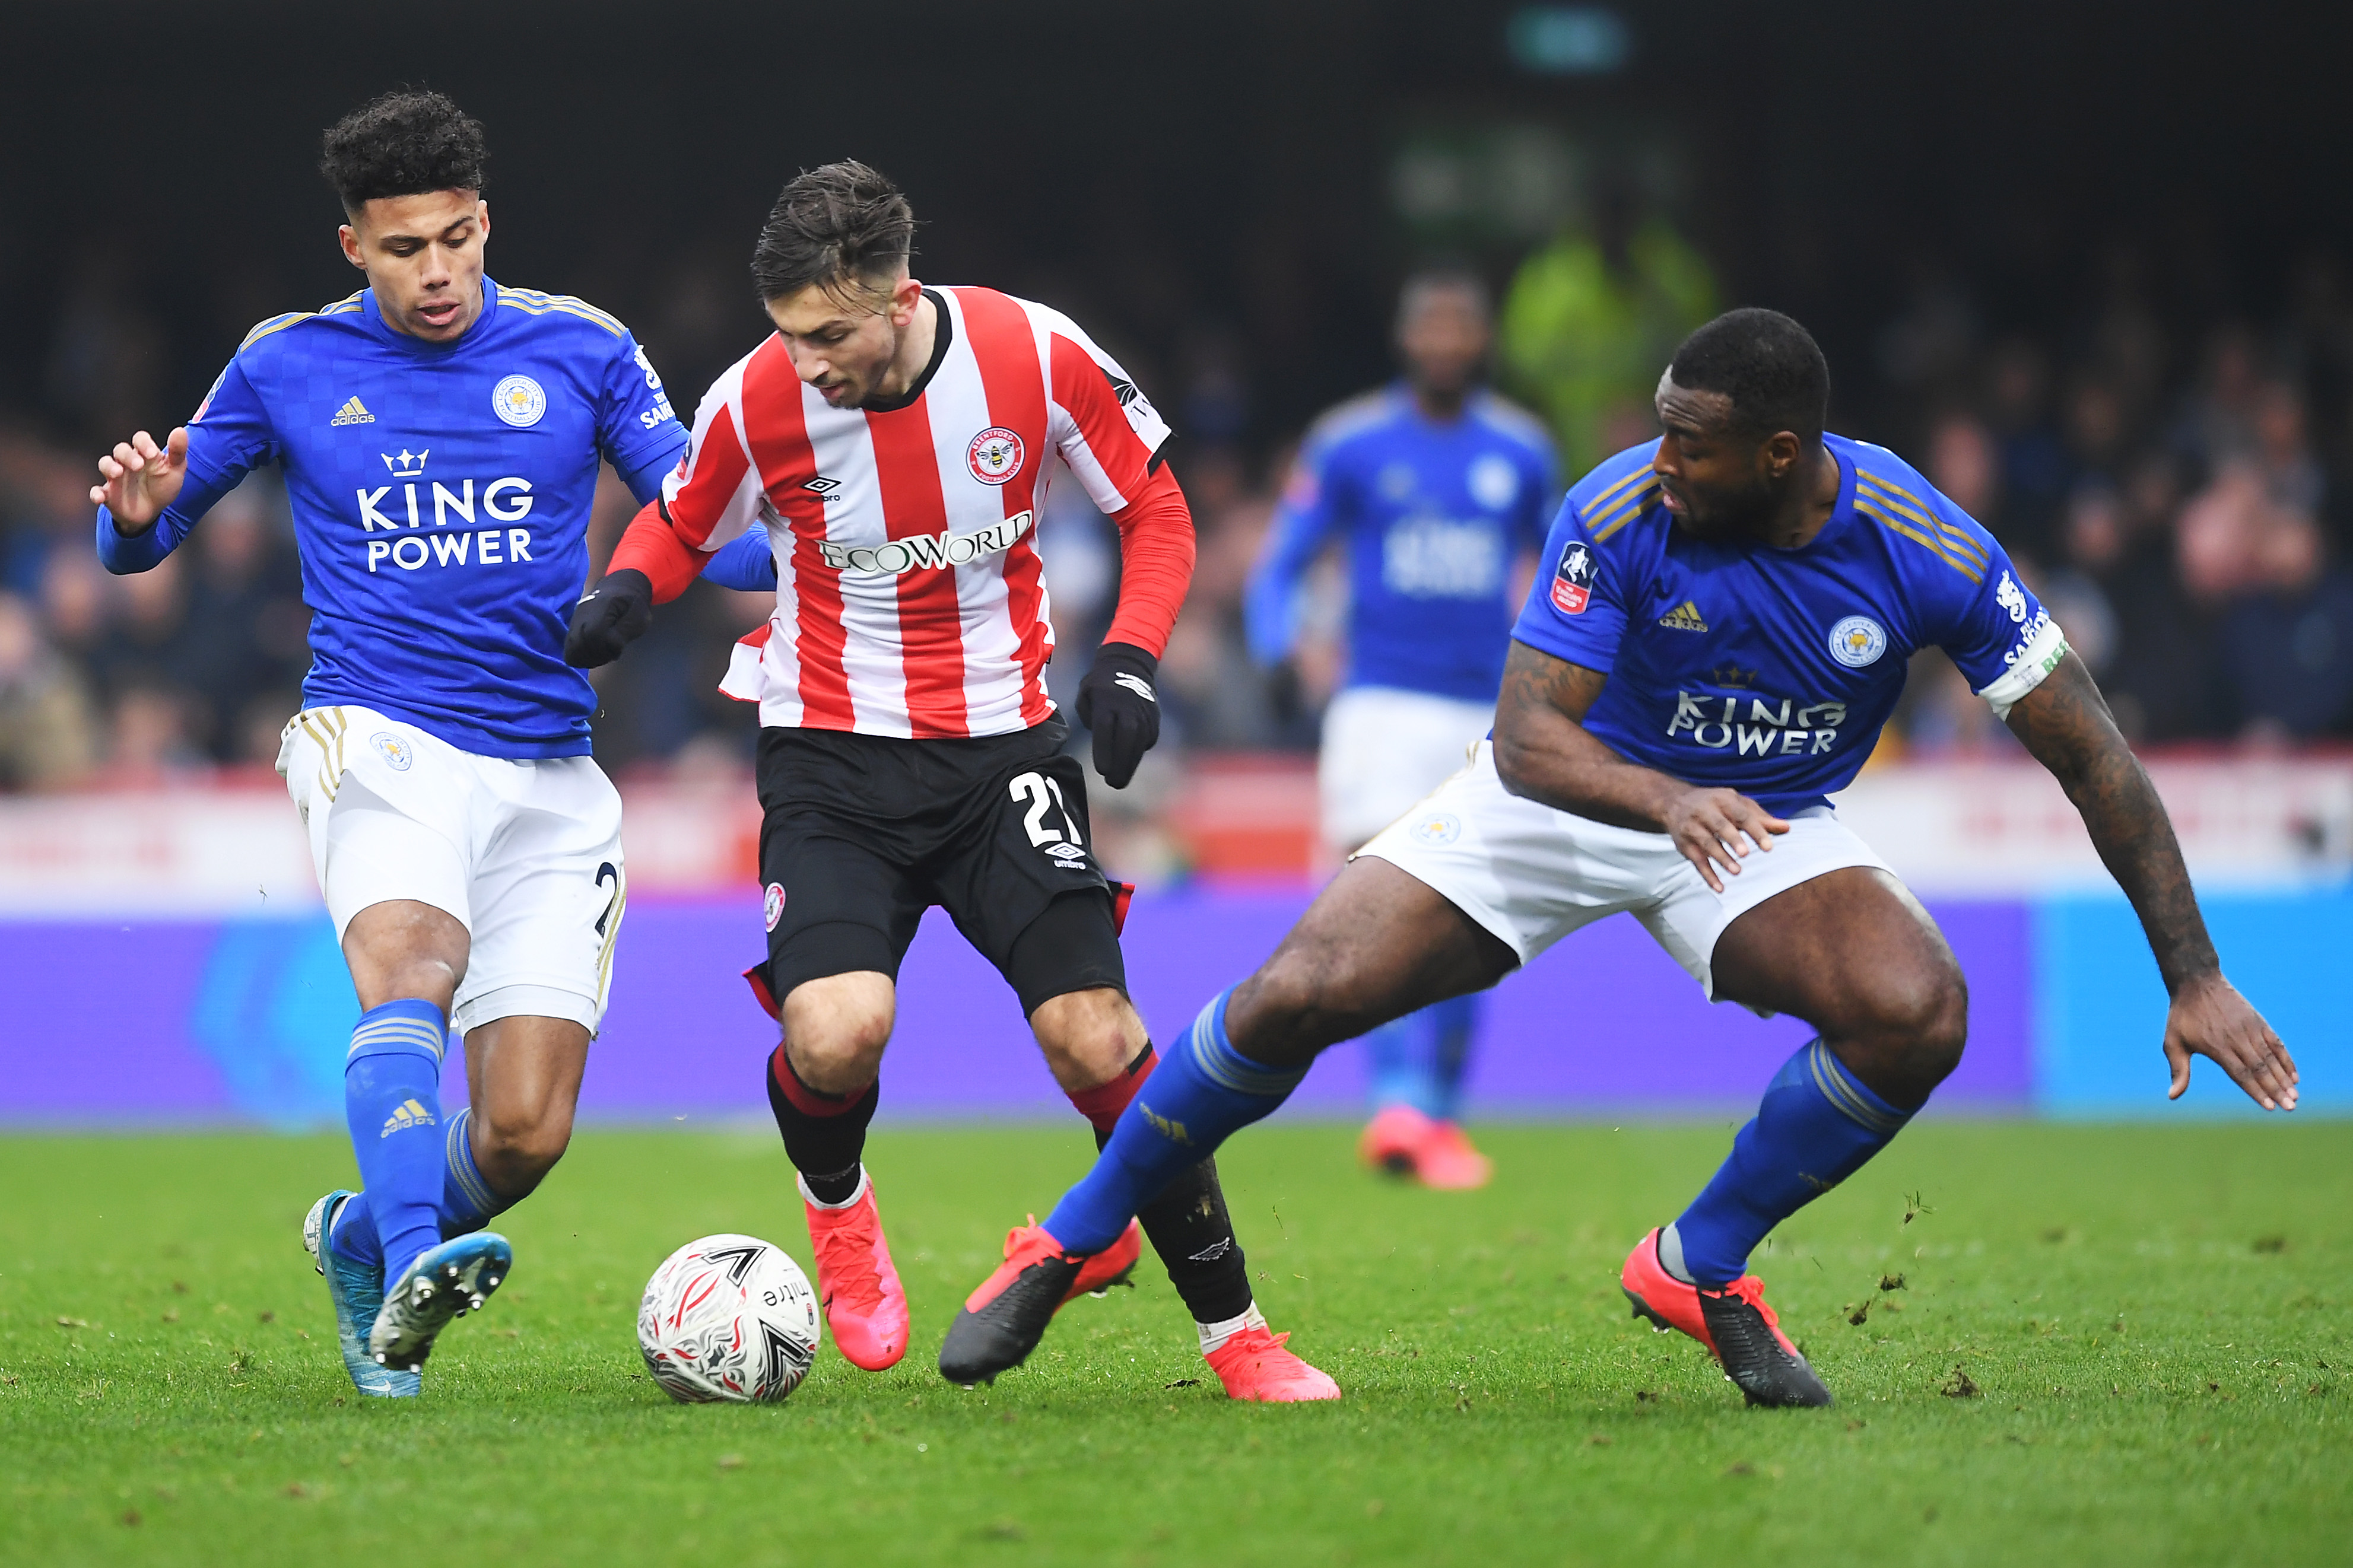 Brentford FC v Leicester City – FA Cup Fourth Round